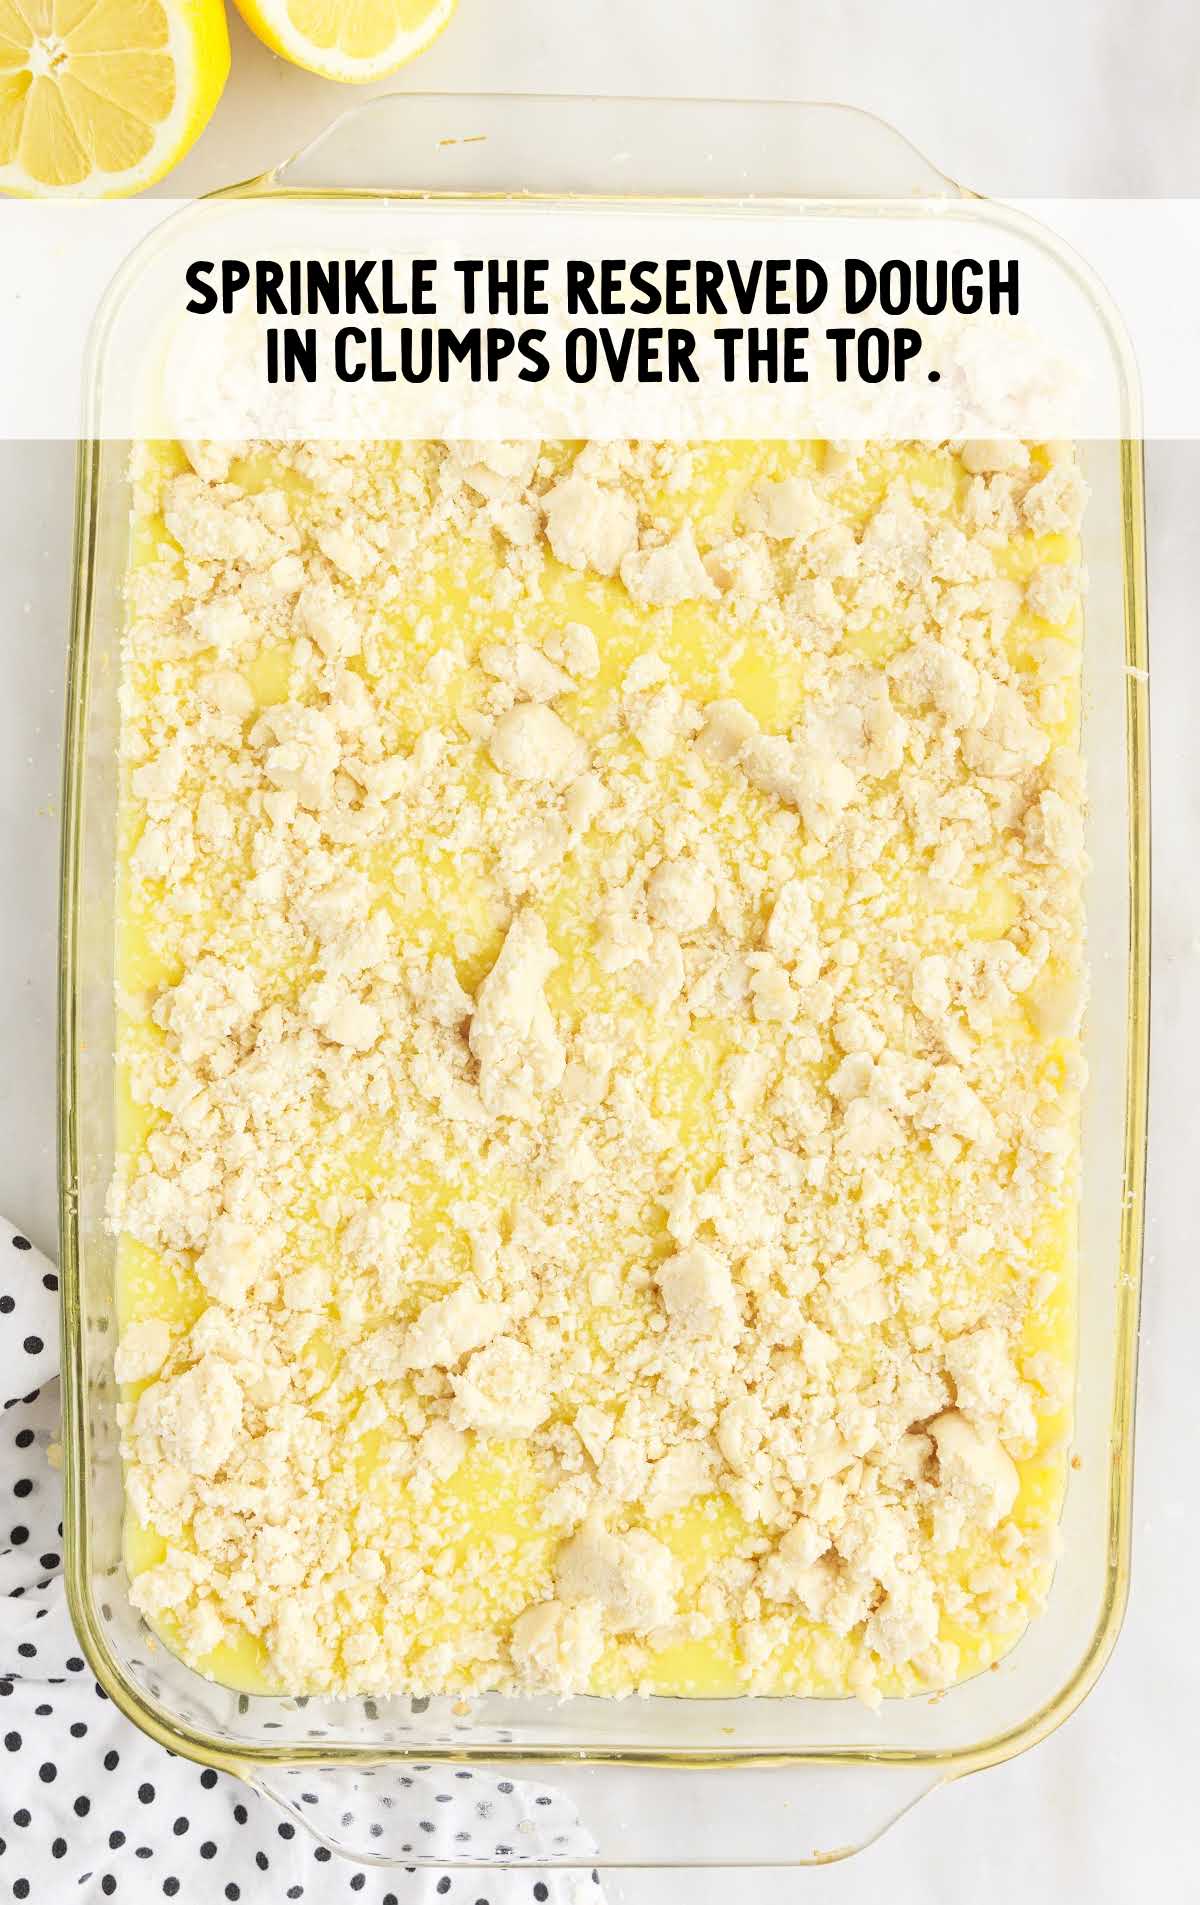 crumbs over the lemon pie filling in a baking dish